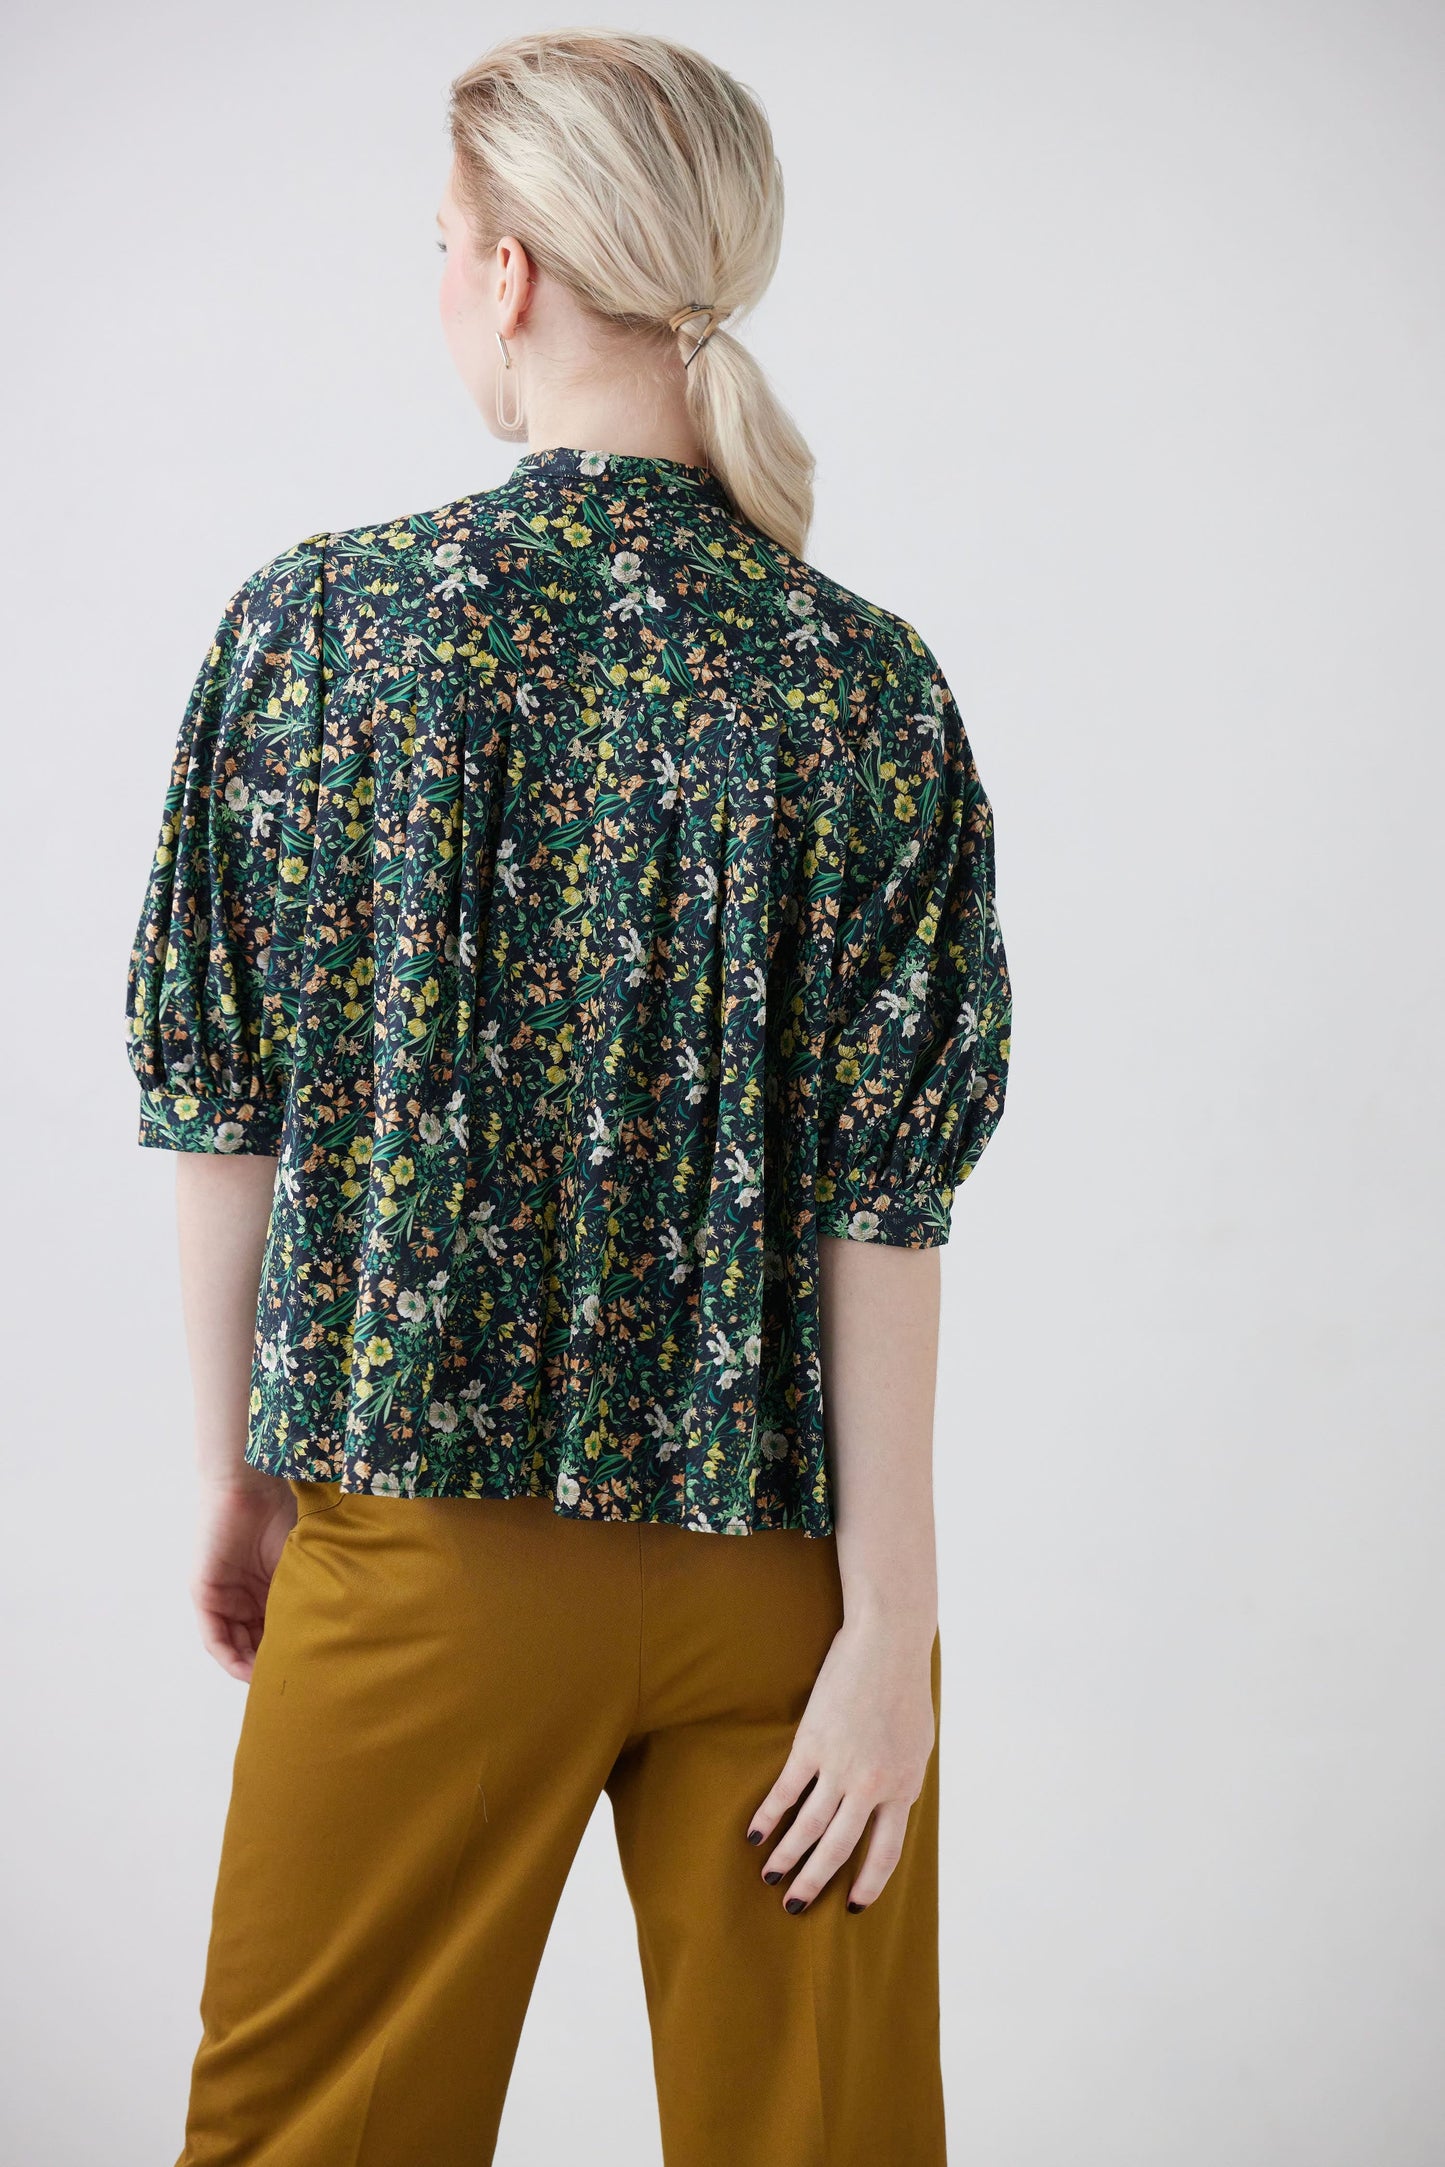 Livia Blouse in Floral Cotton Tops CHRISTINE ALCALAY   